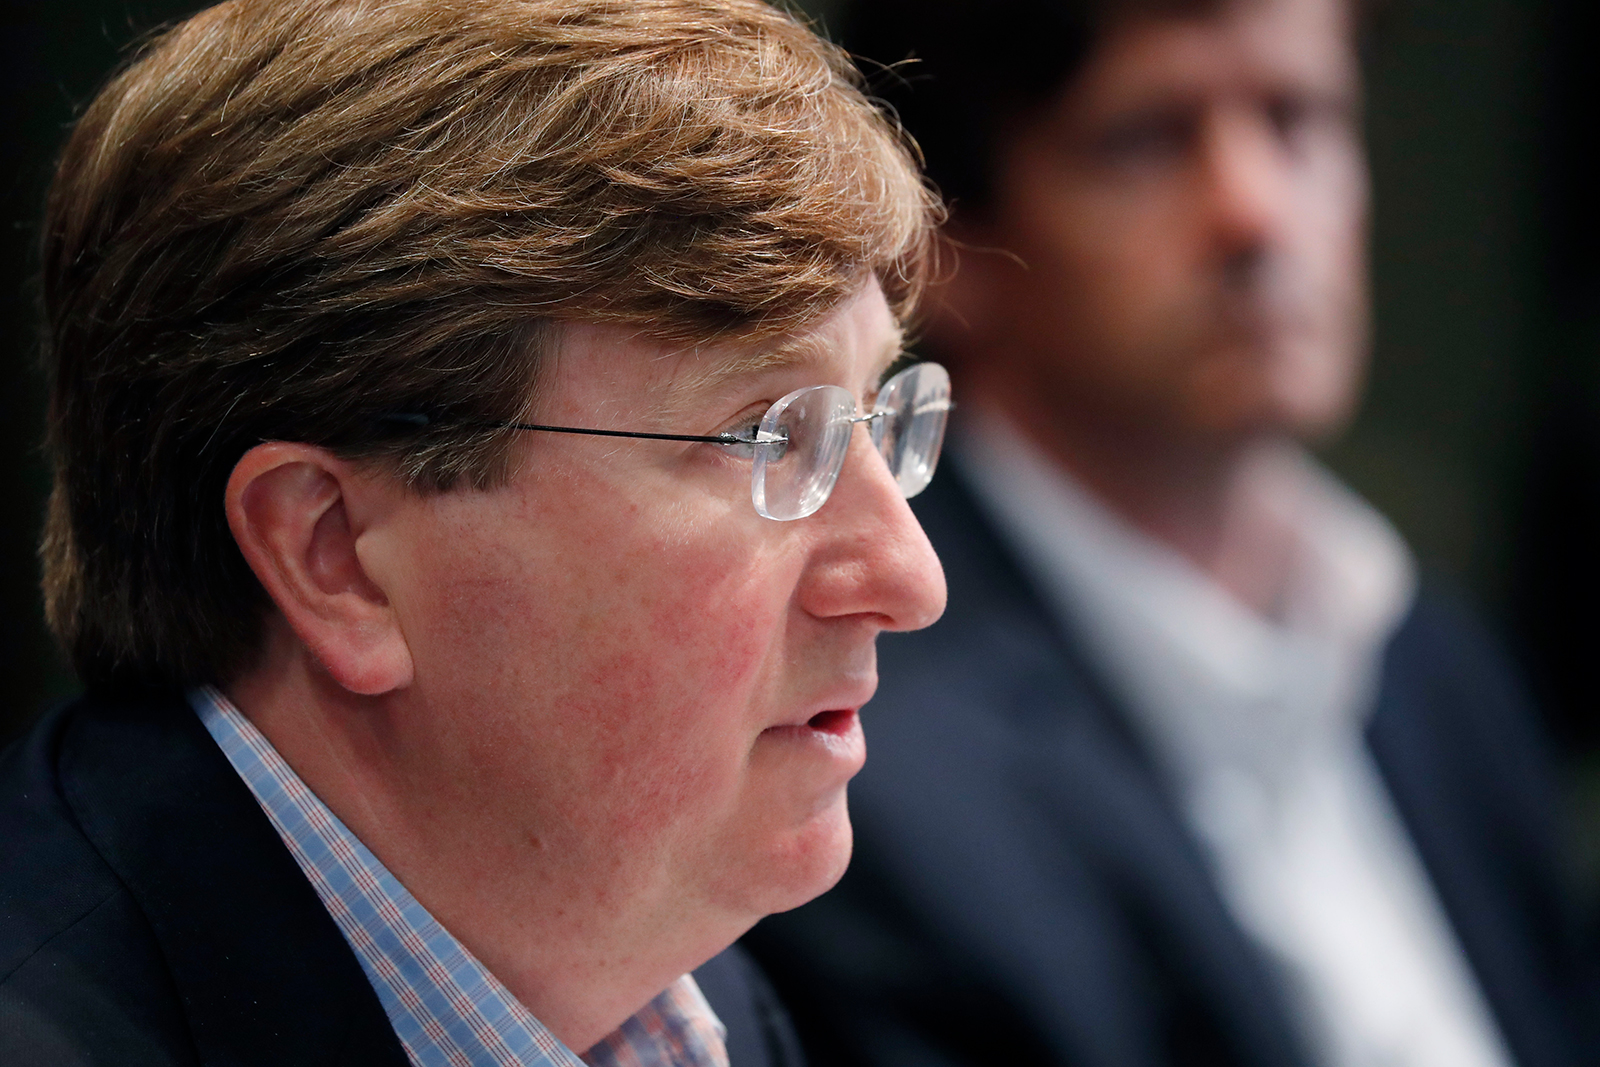 Gov. Tate Reeves responds to a reporter's question during his daily update on the state's response to Covid-19, on May 4 in Jackson, Mississippi.